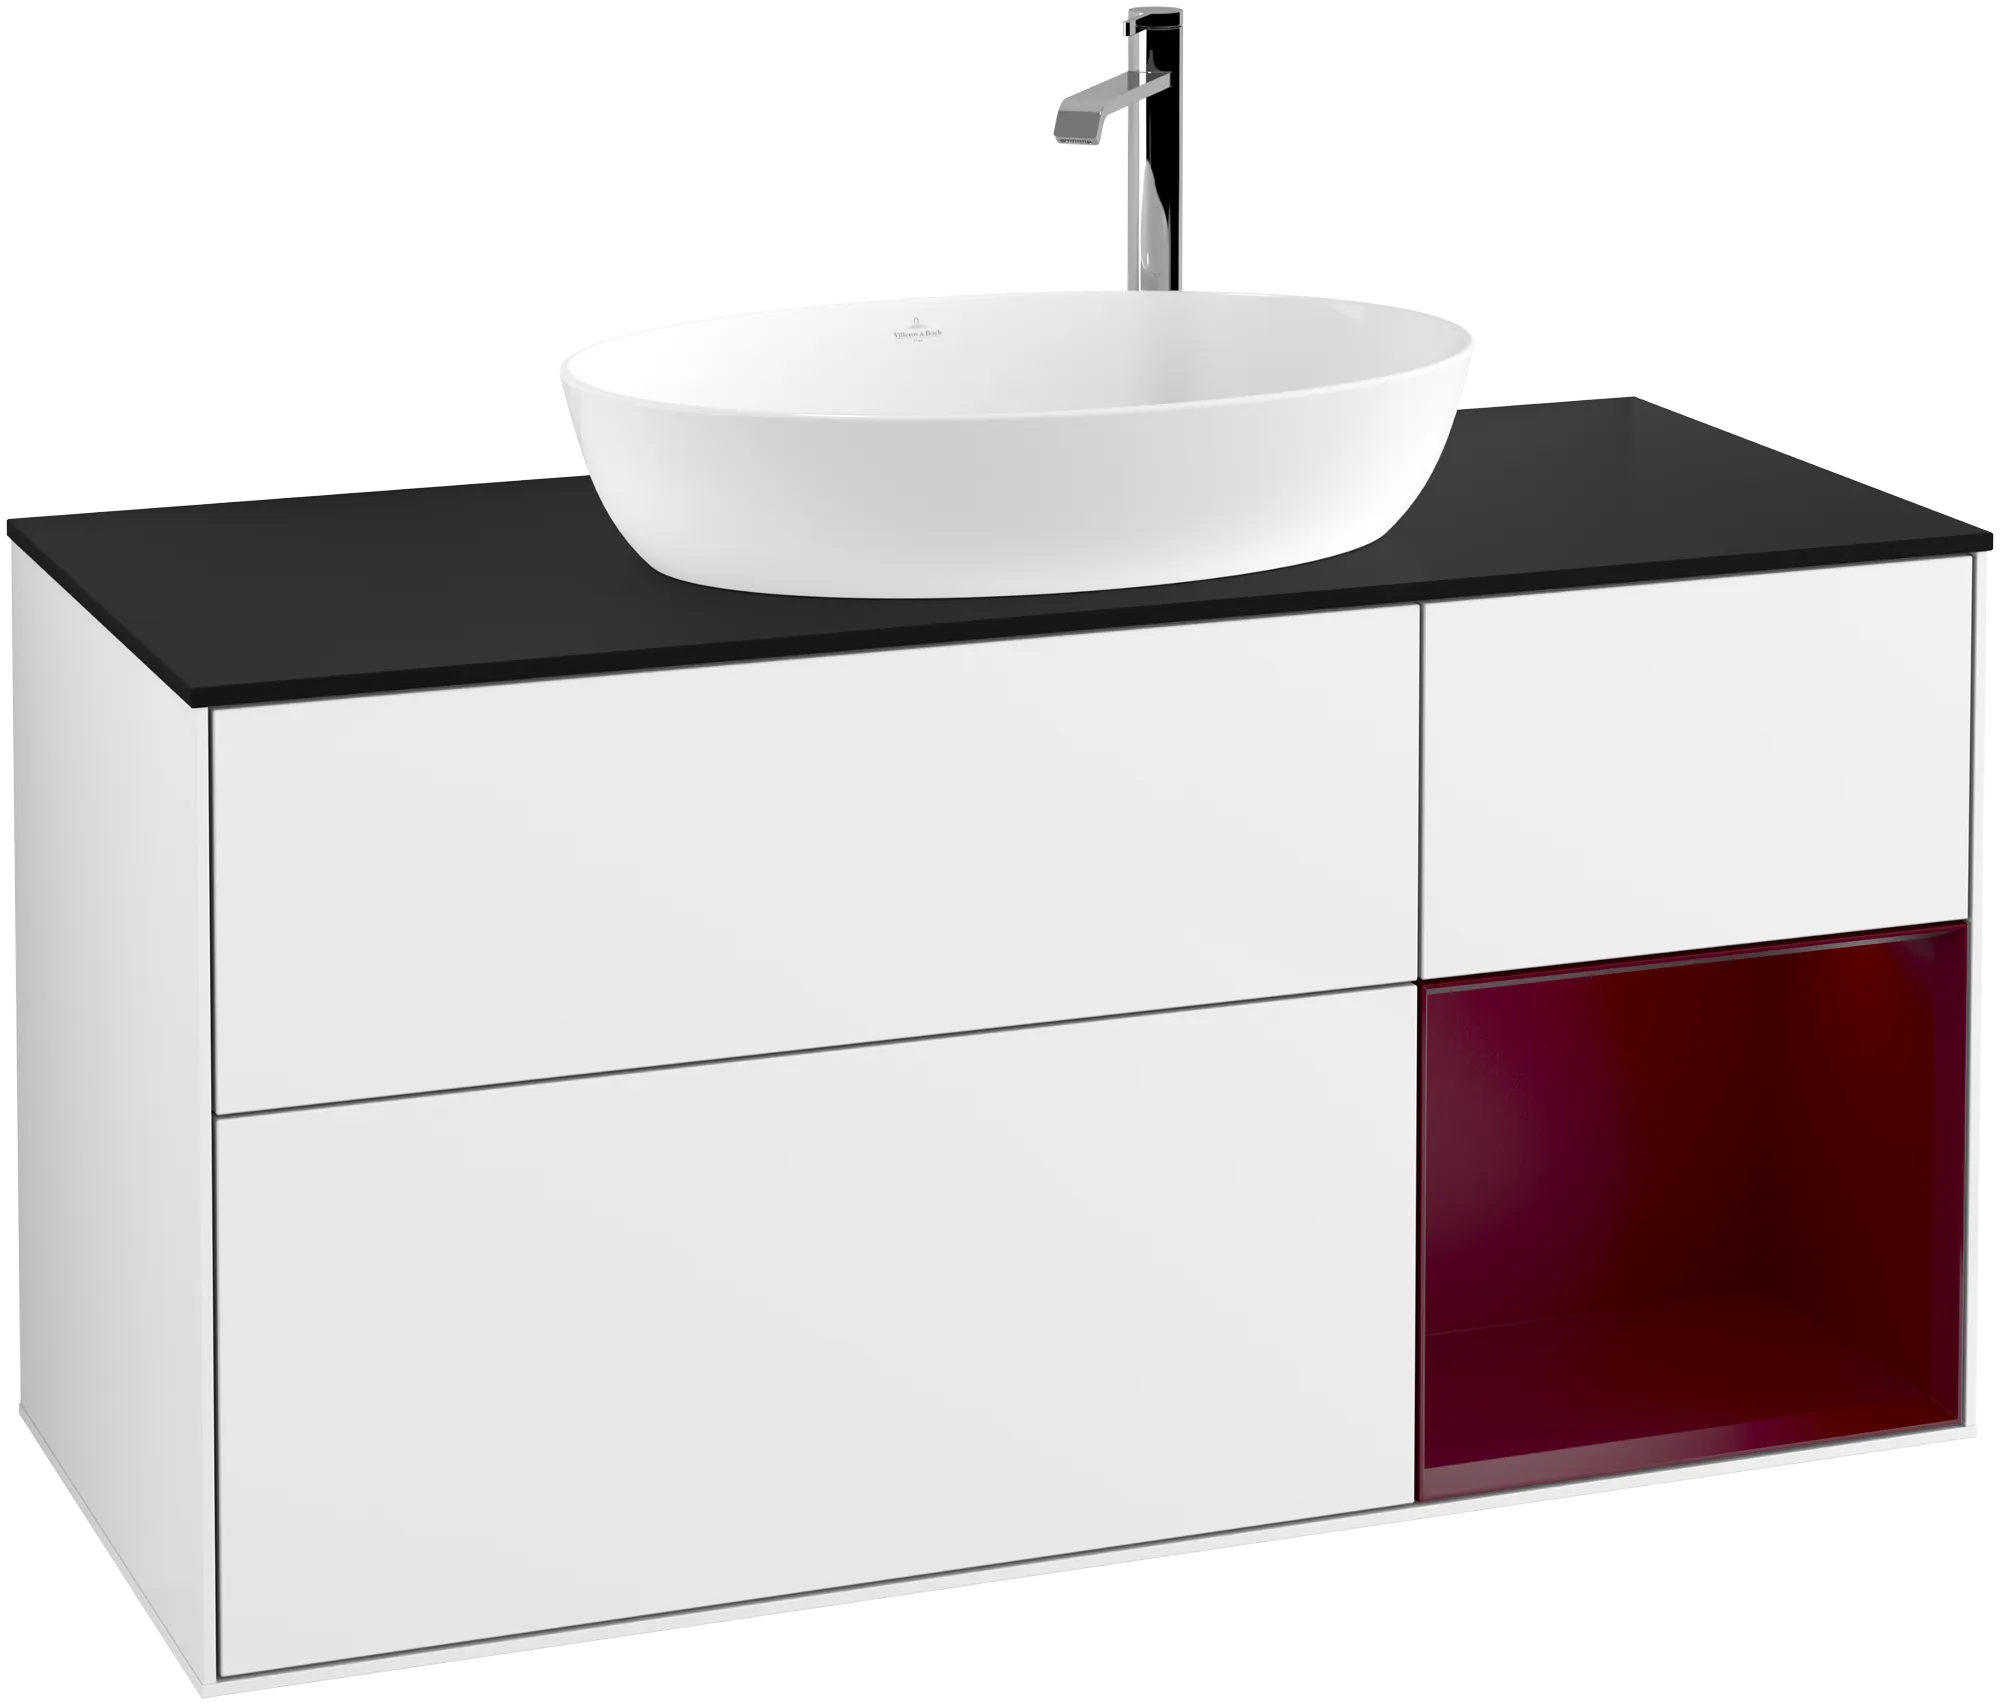 Obrázek VILLEROY BOCH Finion Vanity unit, with lighting, 3 pull-out compartments, 1200 x 603 x 501 mm, Glossy White Lacquer / Peony Matt Lacquer / Glass Black Matt #G952HBGF